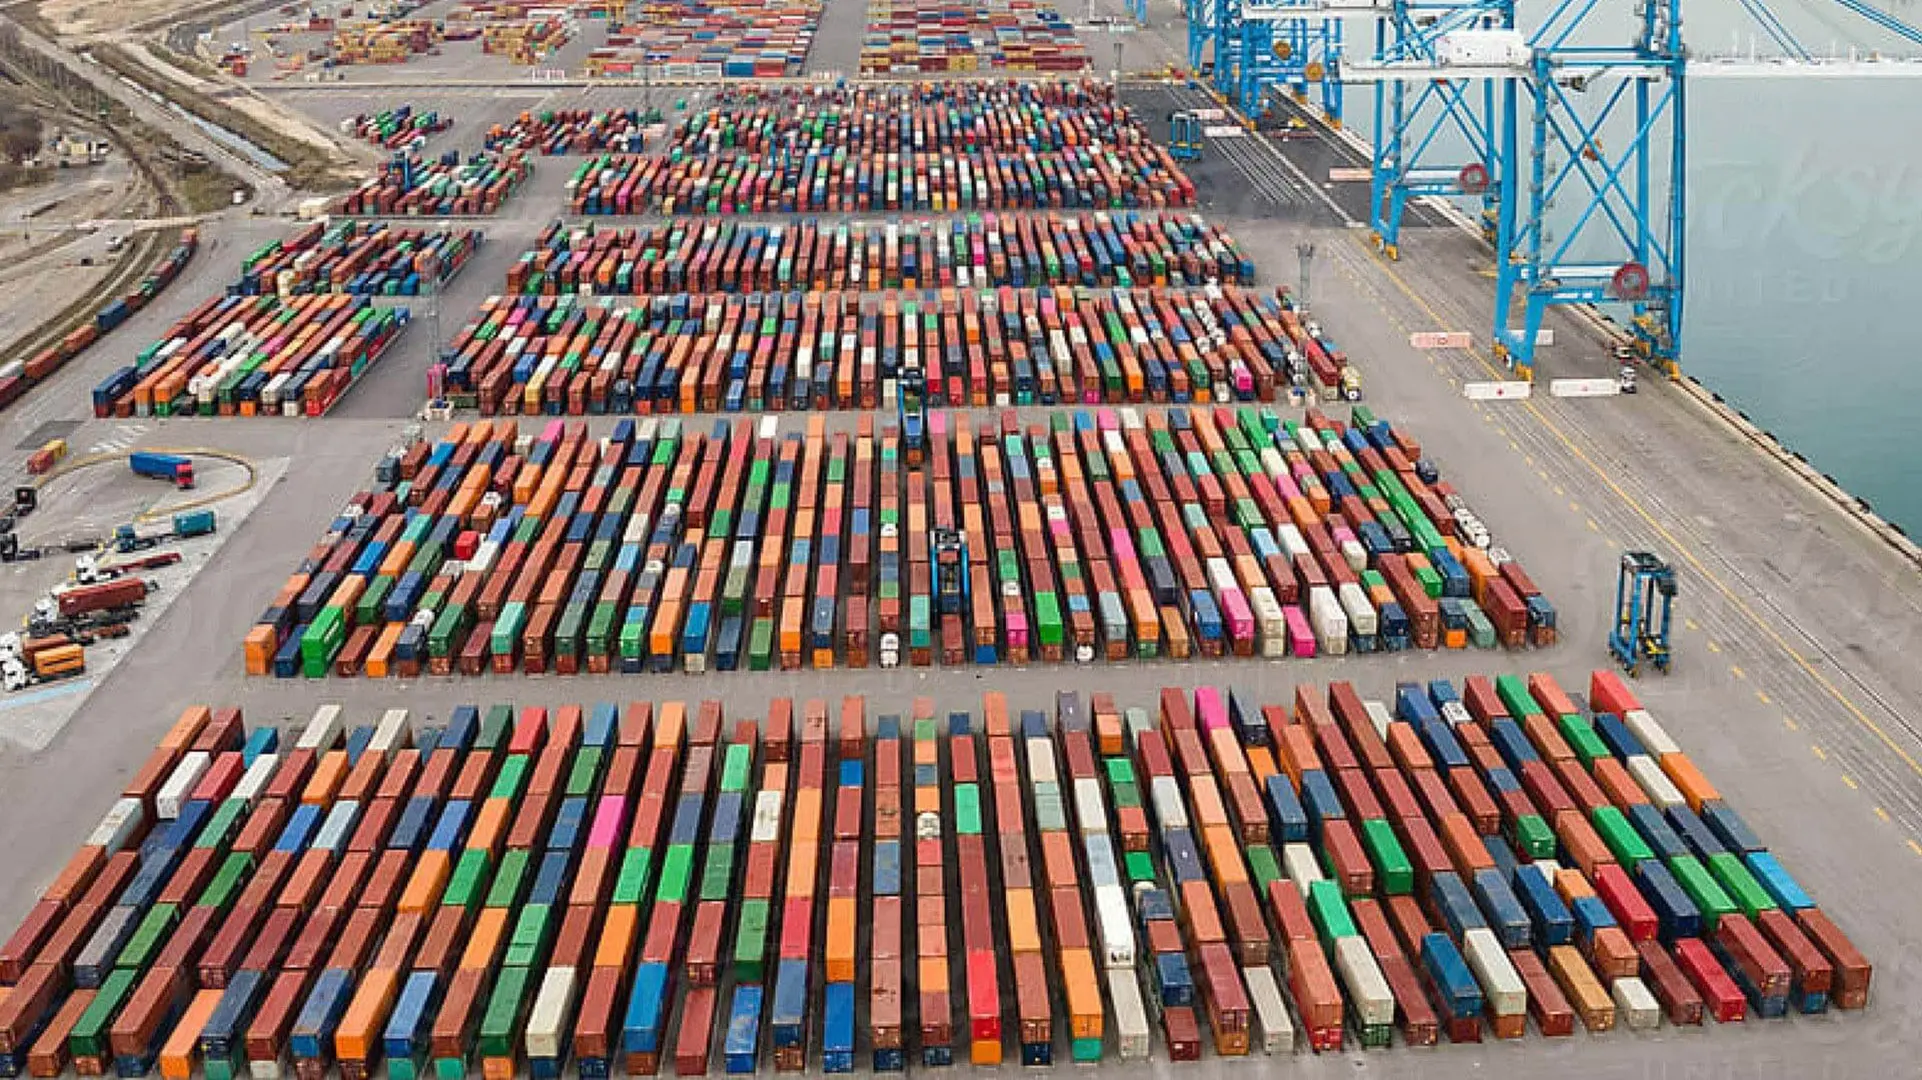 Sample image of containers in a shipyard